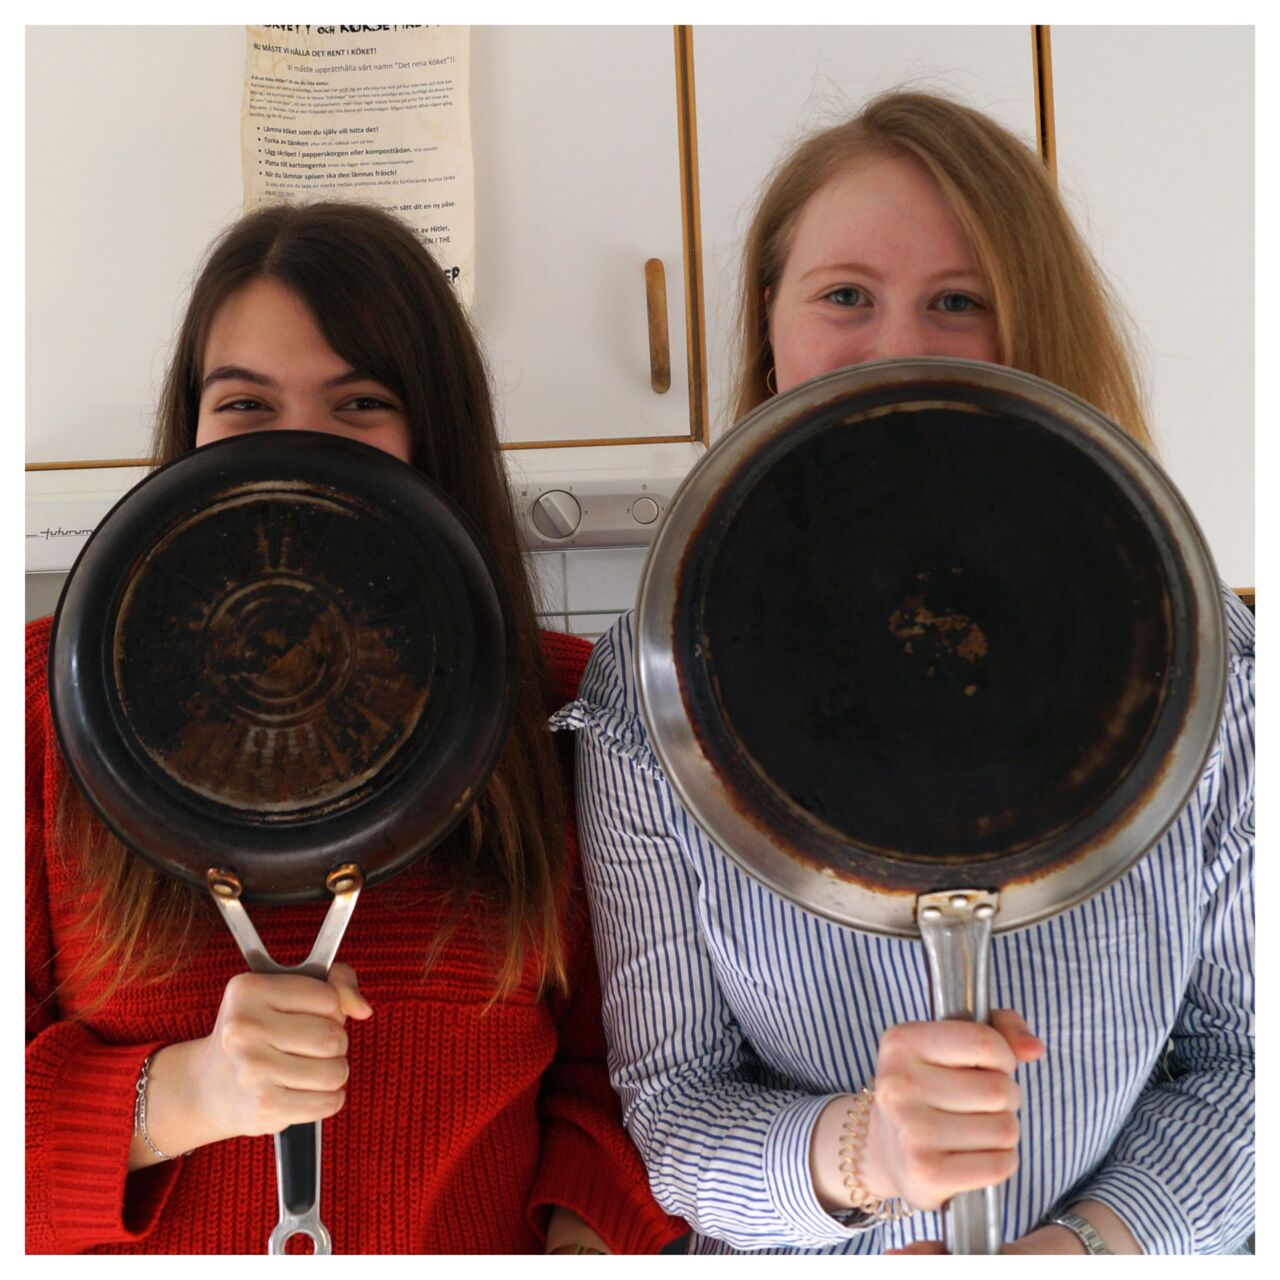 Two girls hold frying pans in front of their mouths.